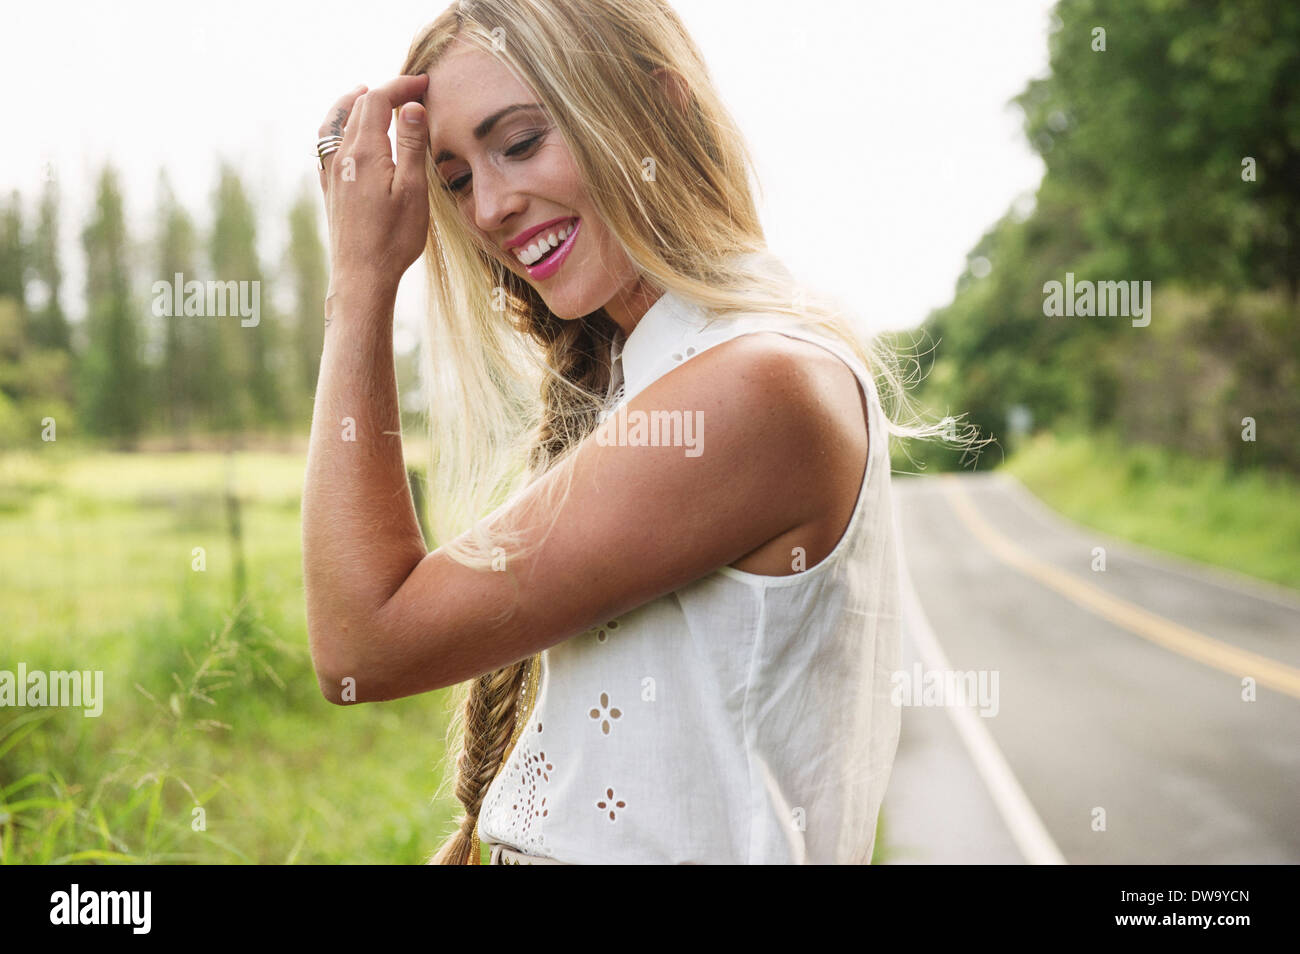 Young woman standing on roadside Stock Photo